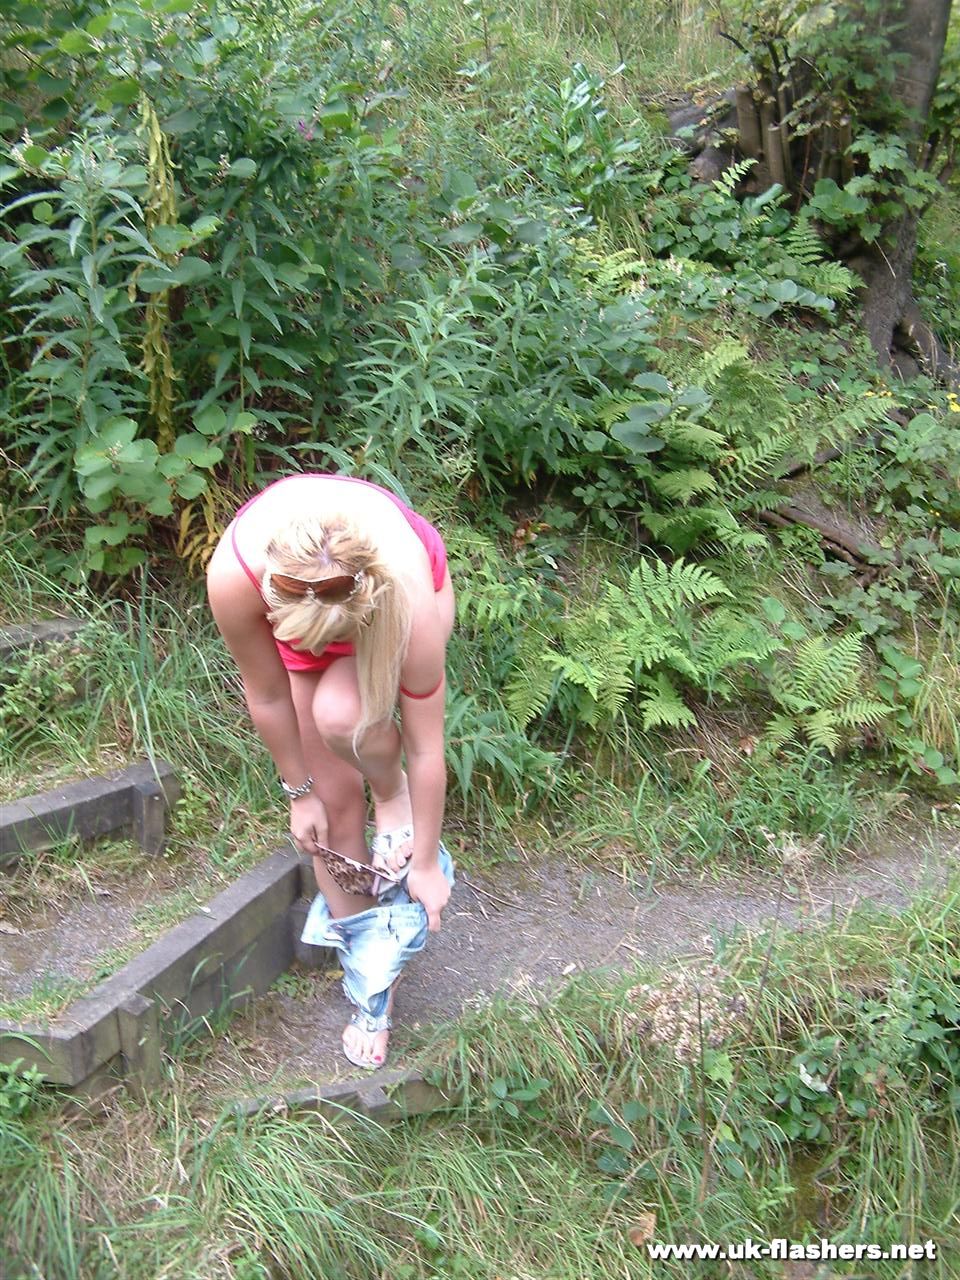 Overweight UK female with blonde hair strips naked on a popular walking trails foto porno #428197329 | UK Flashers Pics, Lena Leigh, Public, porno mobile